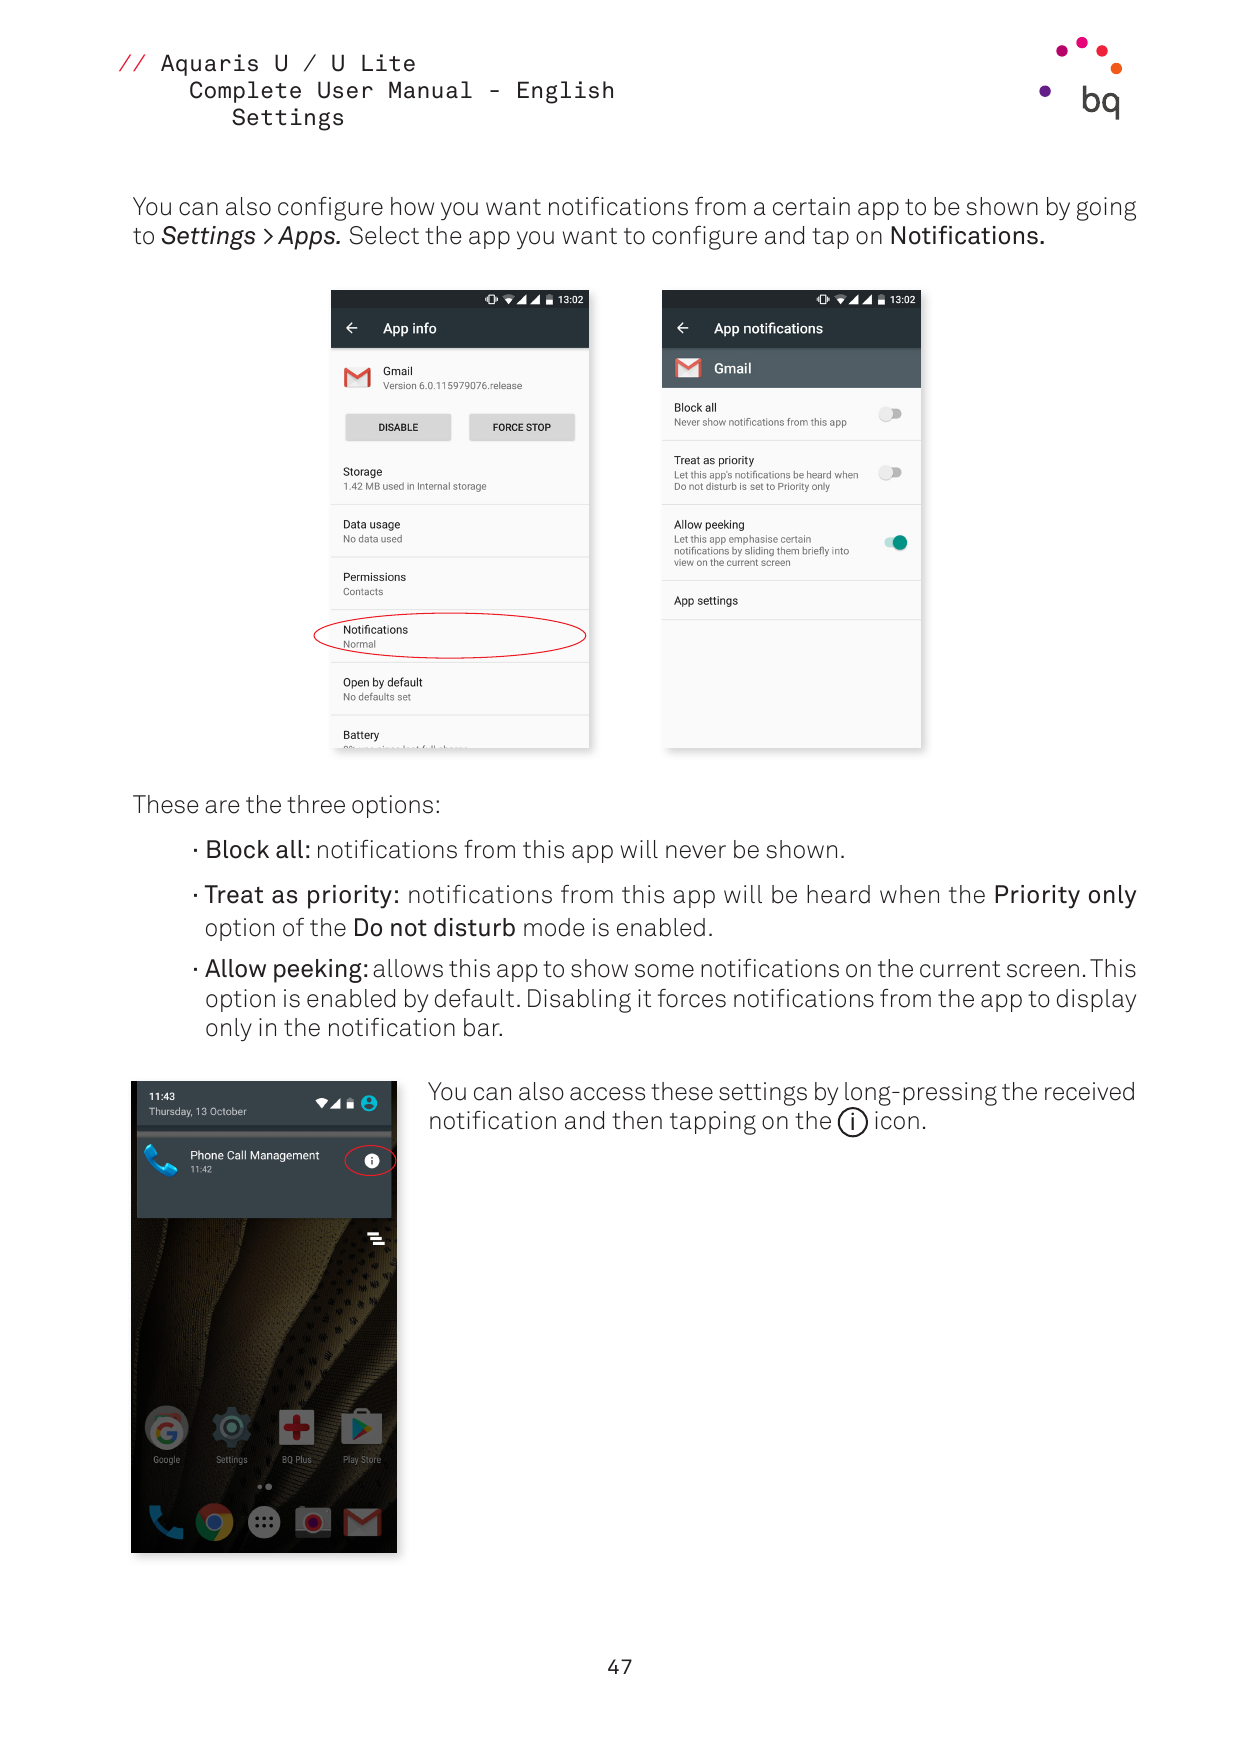 // Aquaris U / U LiteComplete User Manual - EnglishSettingsYou can also configure how you want notifications from a certain app 